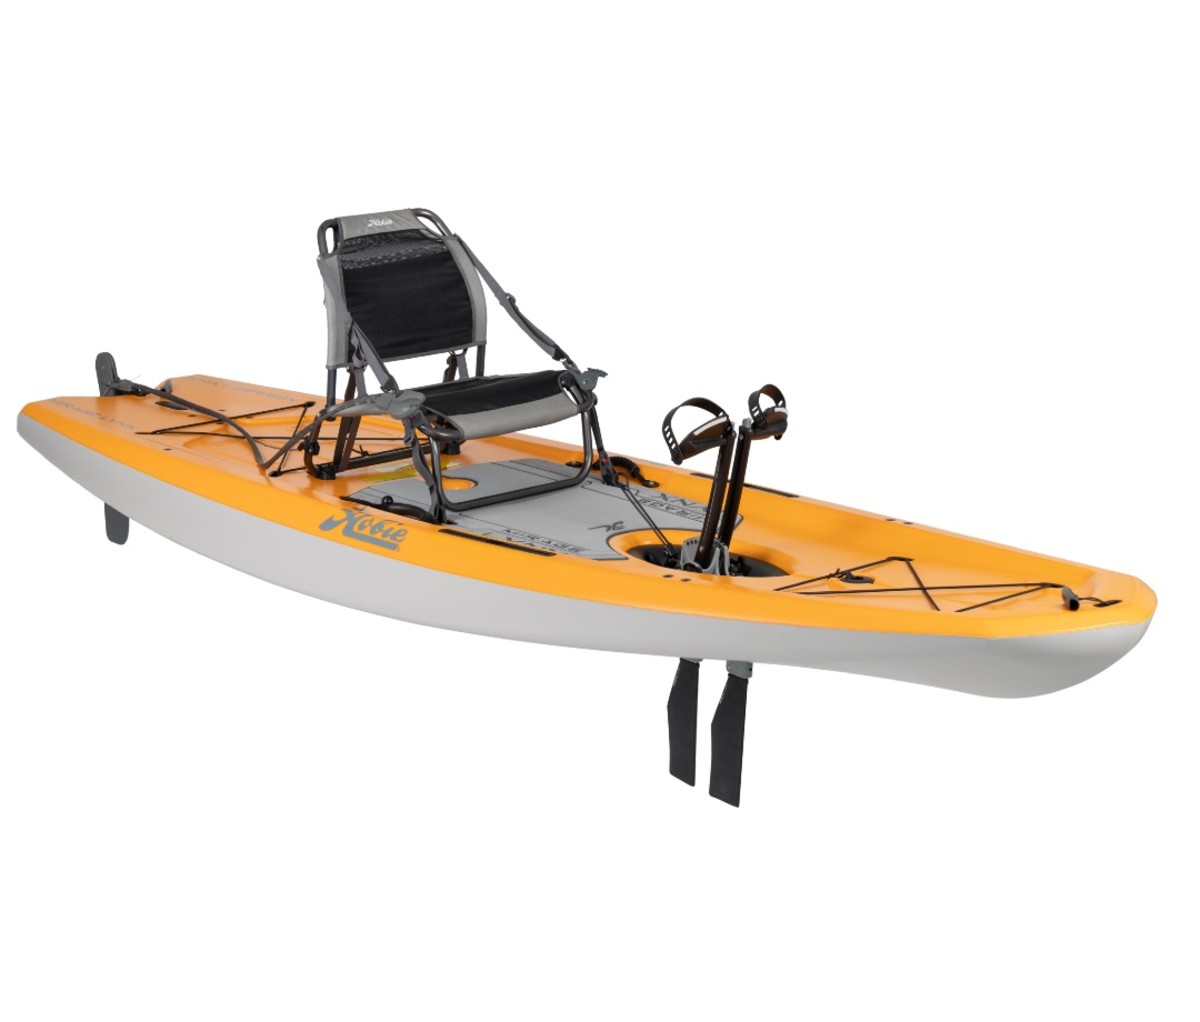 Hobie's new Mirage Lynx kayak is a pedal-powered jack-of-all-trades on the water.